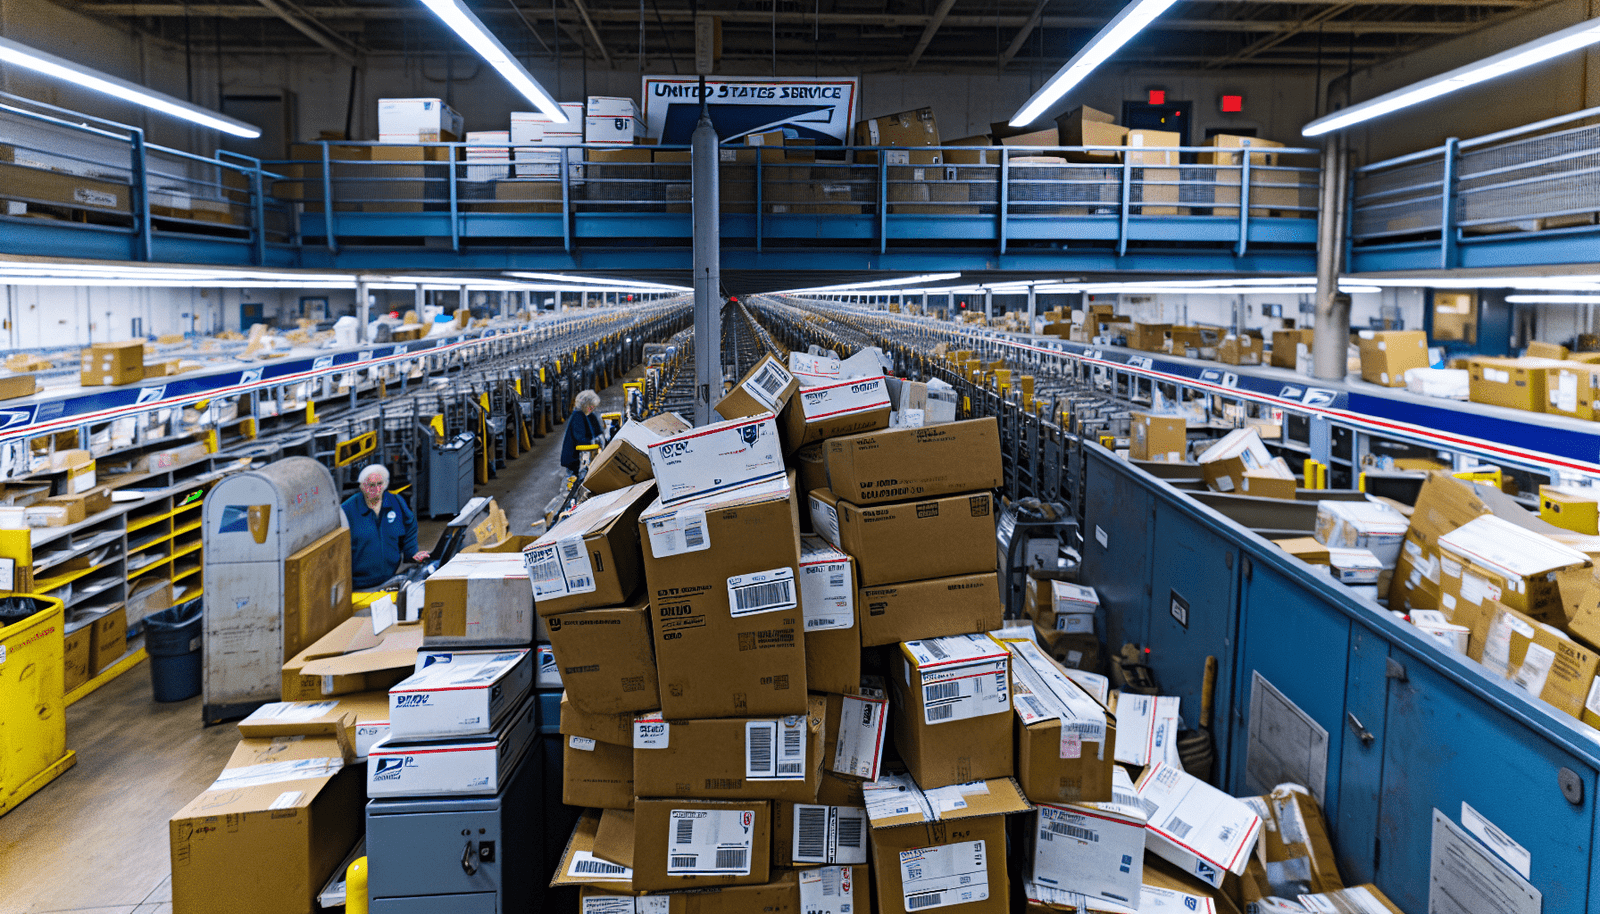 High volume of packages at USPS facility